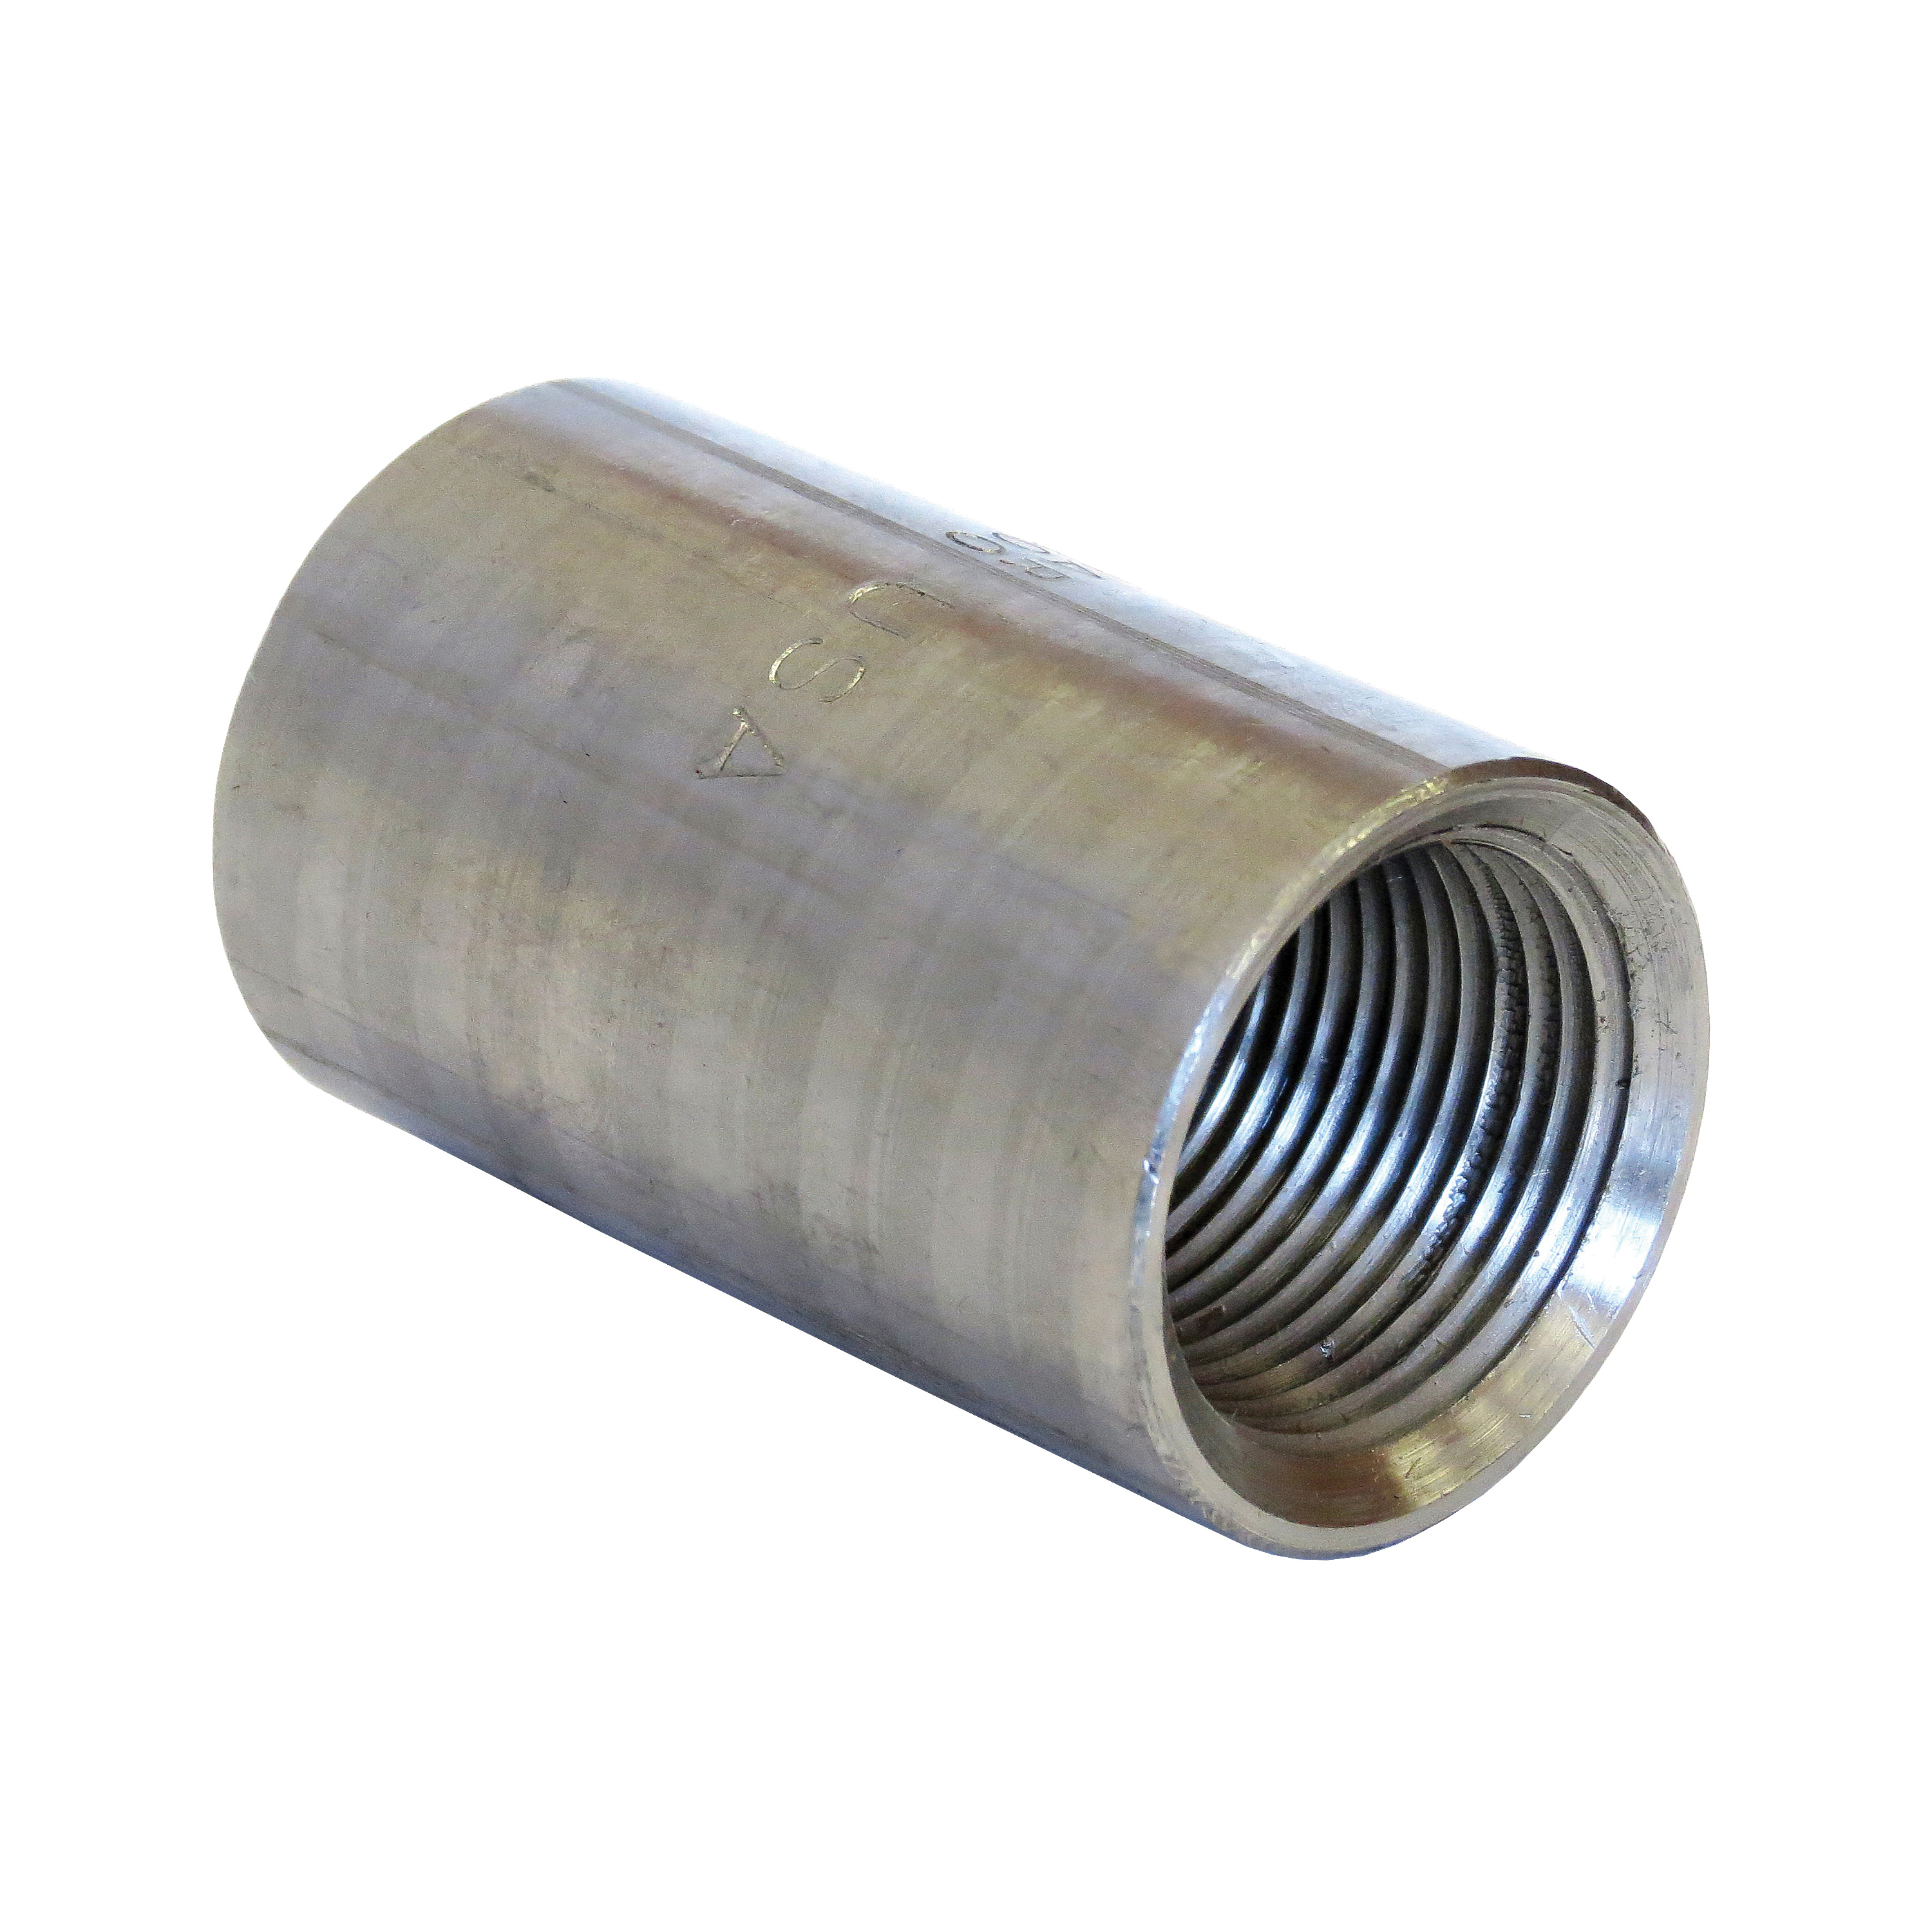 0321200560 FIG 337 Taper Tapped Non-Recessed Full Coupling, Steel, 3-1/2 in, SCH 80/XH and SCH XS, NPT, Galvanized, Domestic